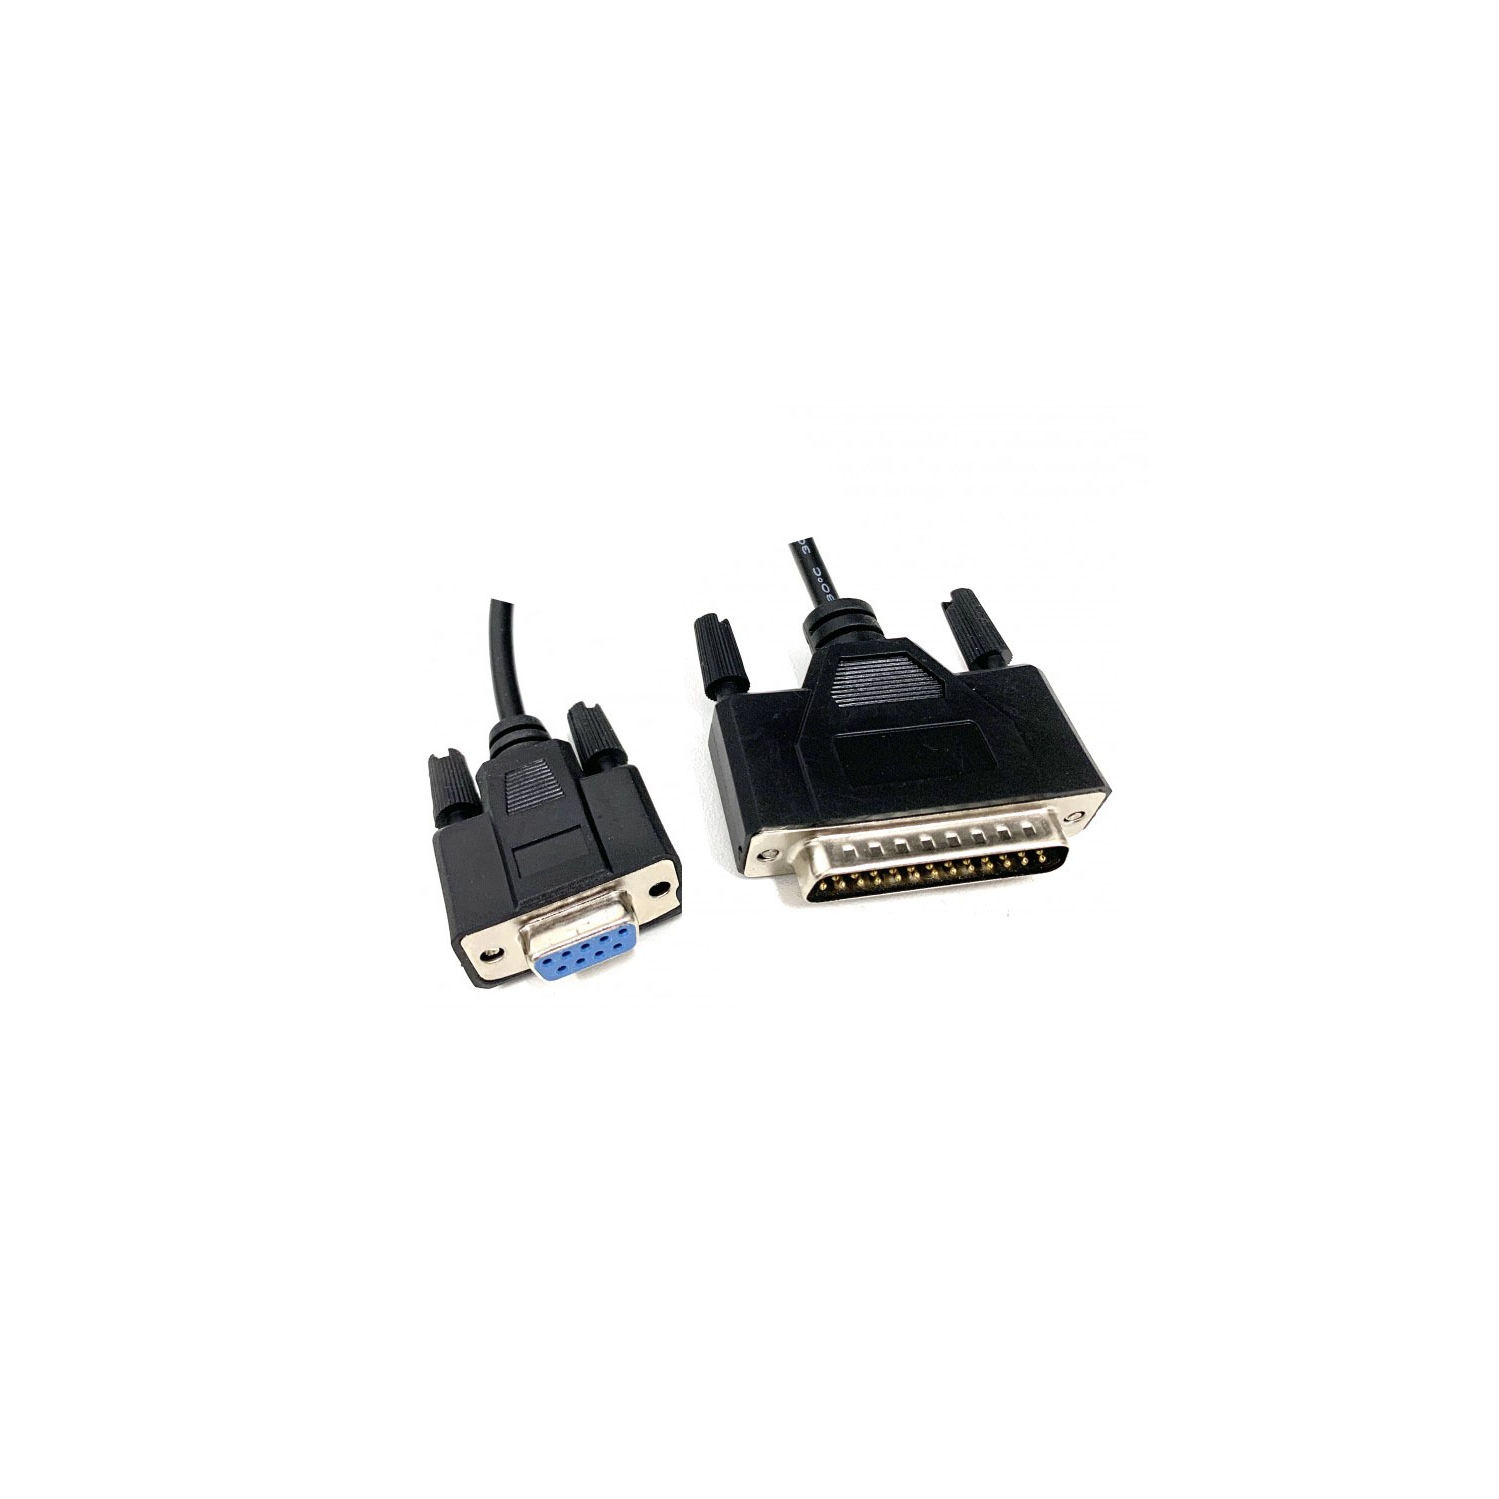 Free Shipping! HYFAI DB9 Female to DB25 Male Null-Modem Serial Port Com RS232 Cable Cord - 10 ft